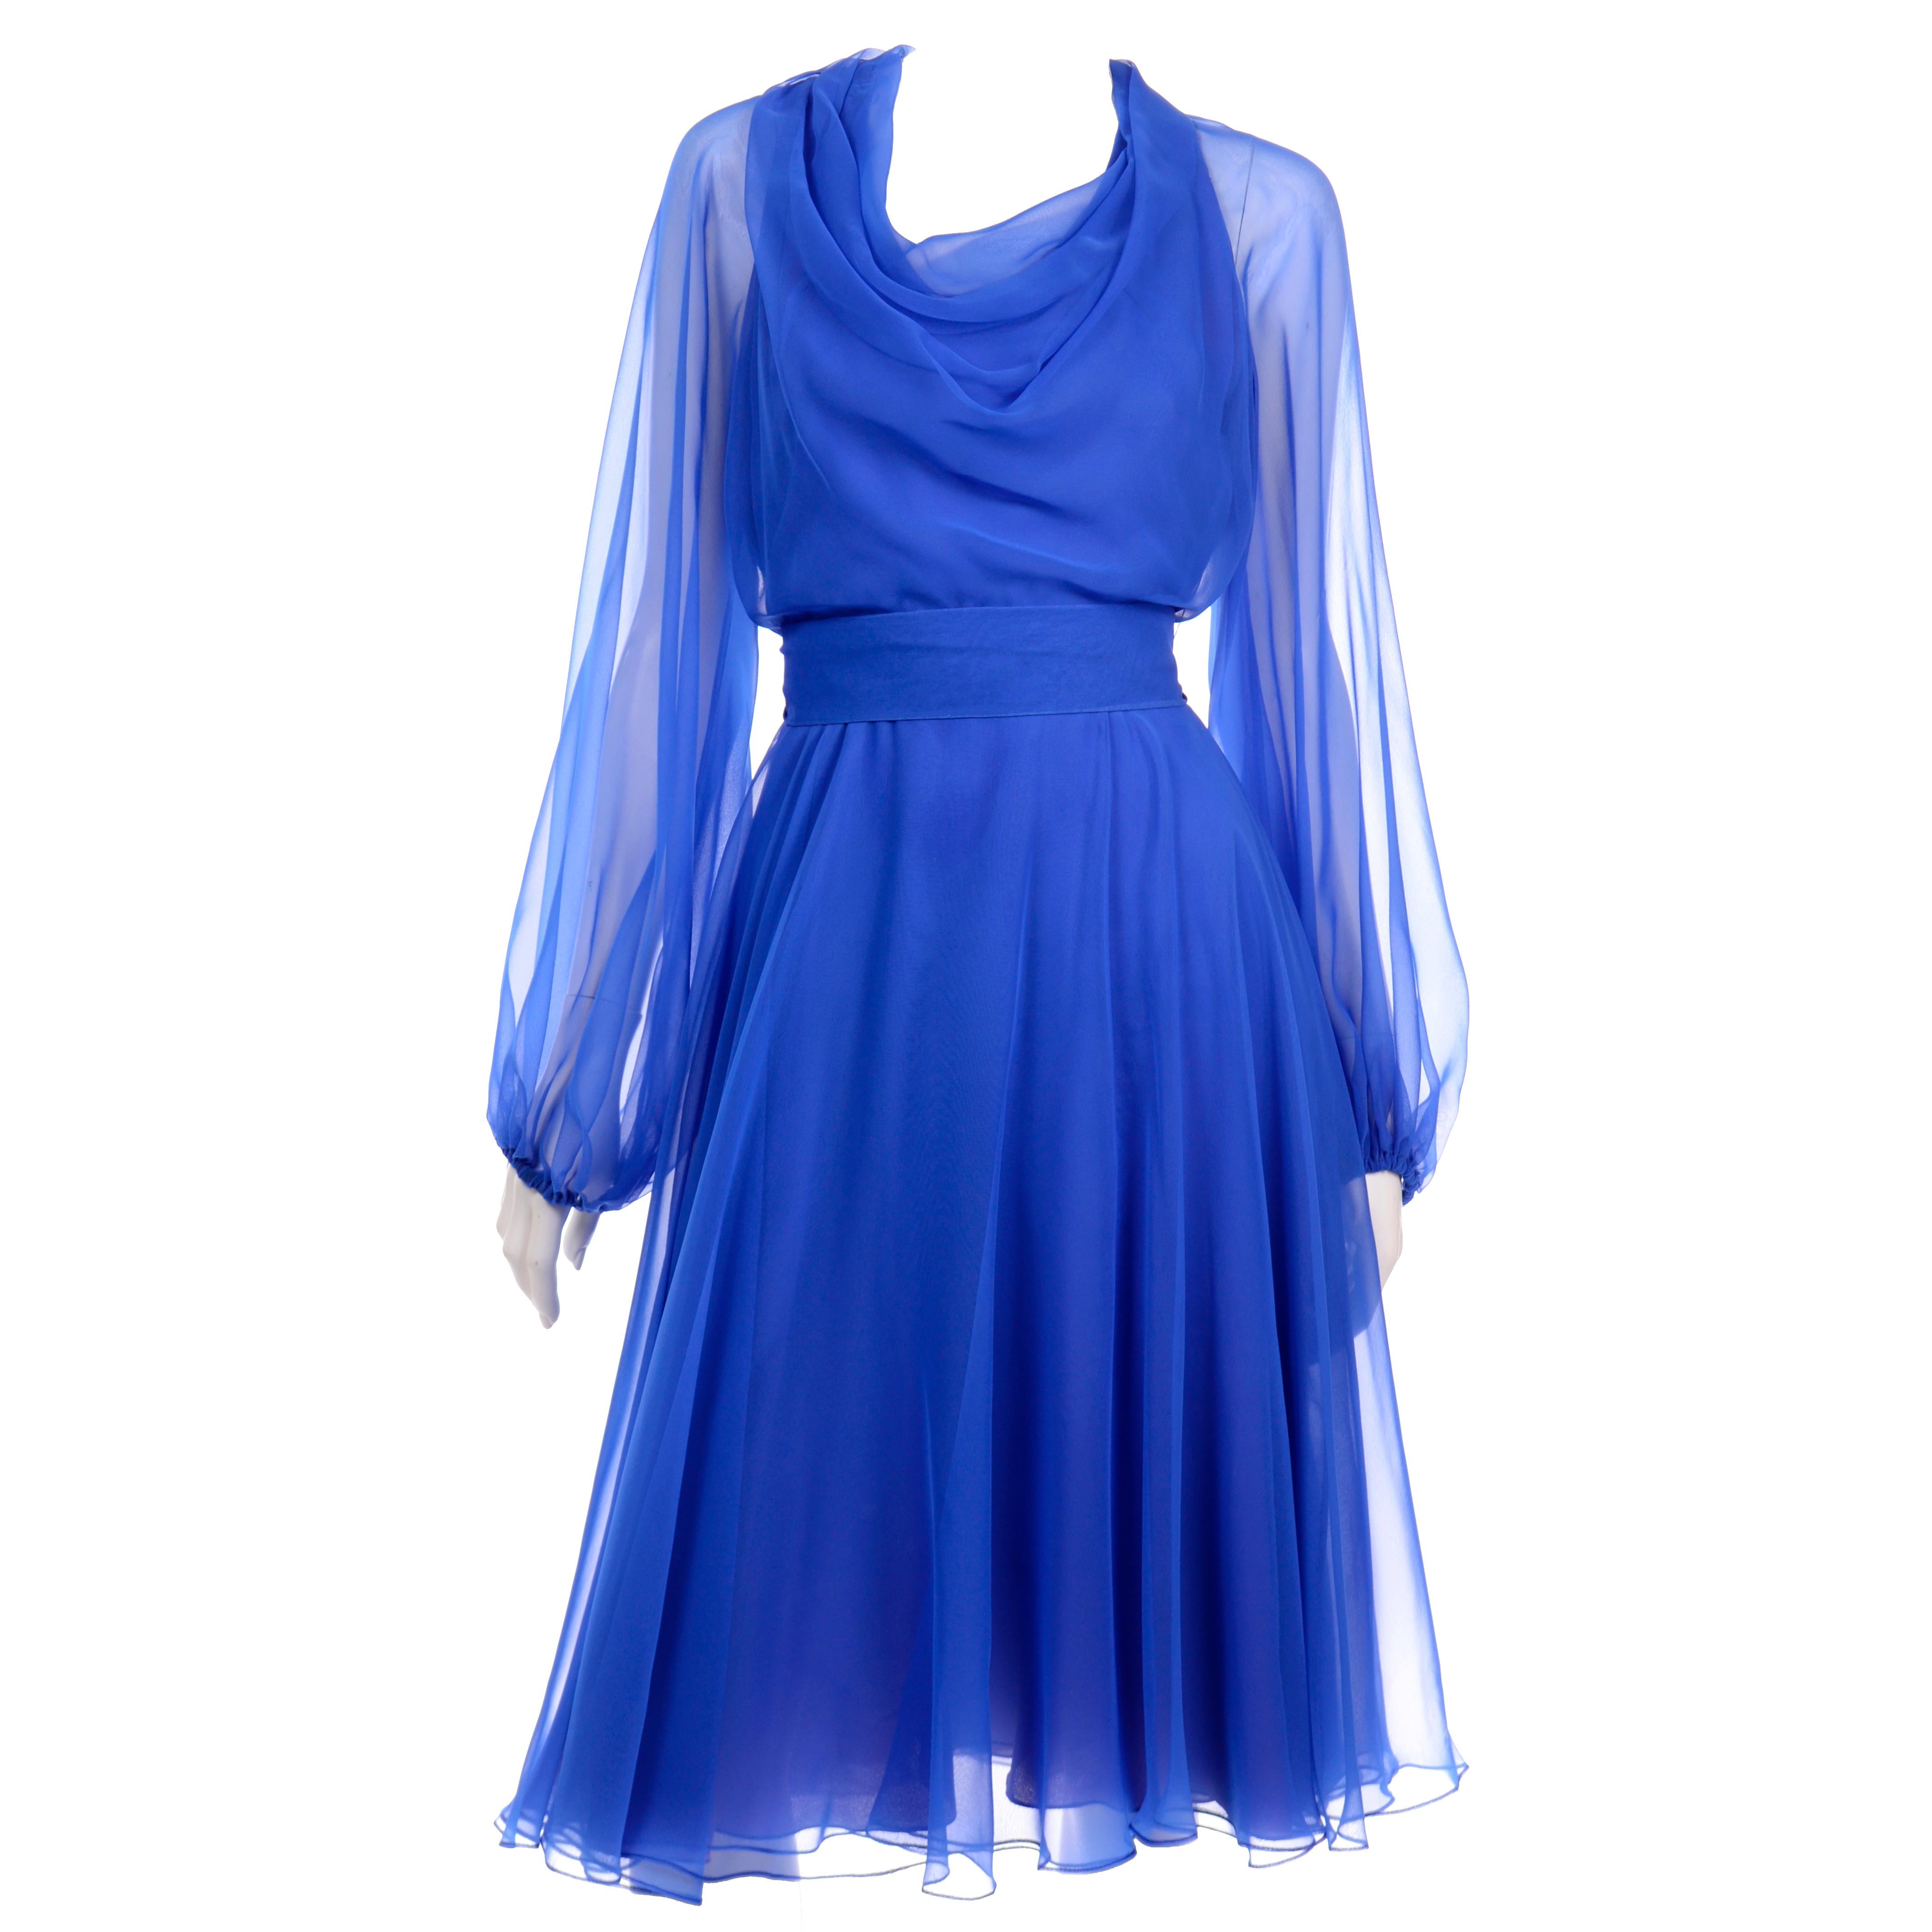 This is a 1970's vintage blue chiffon dress from Estevez. The dress has sheer sleeves, a shawl neckline and a full skirt.  There is a fabric sash and the dress closes with a back zipper. The dress has blousy sleeves with elastic cuffs and the waist